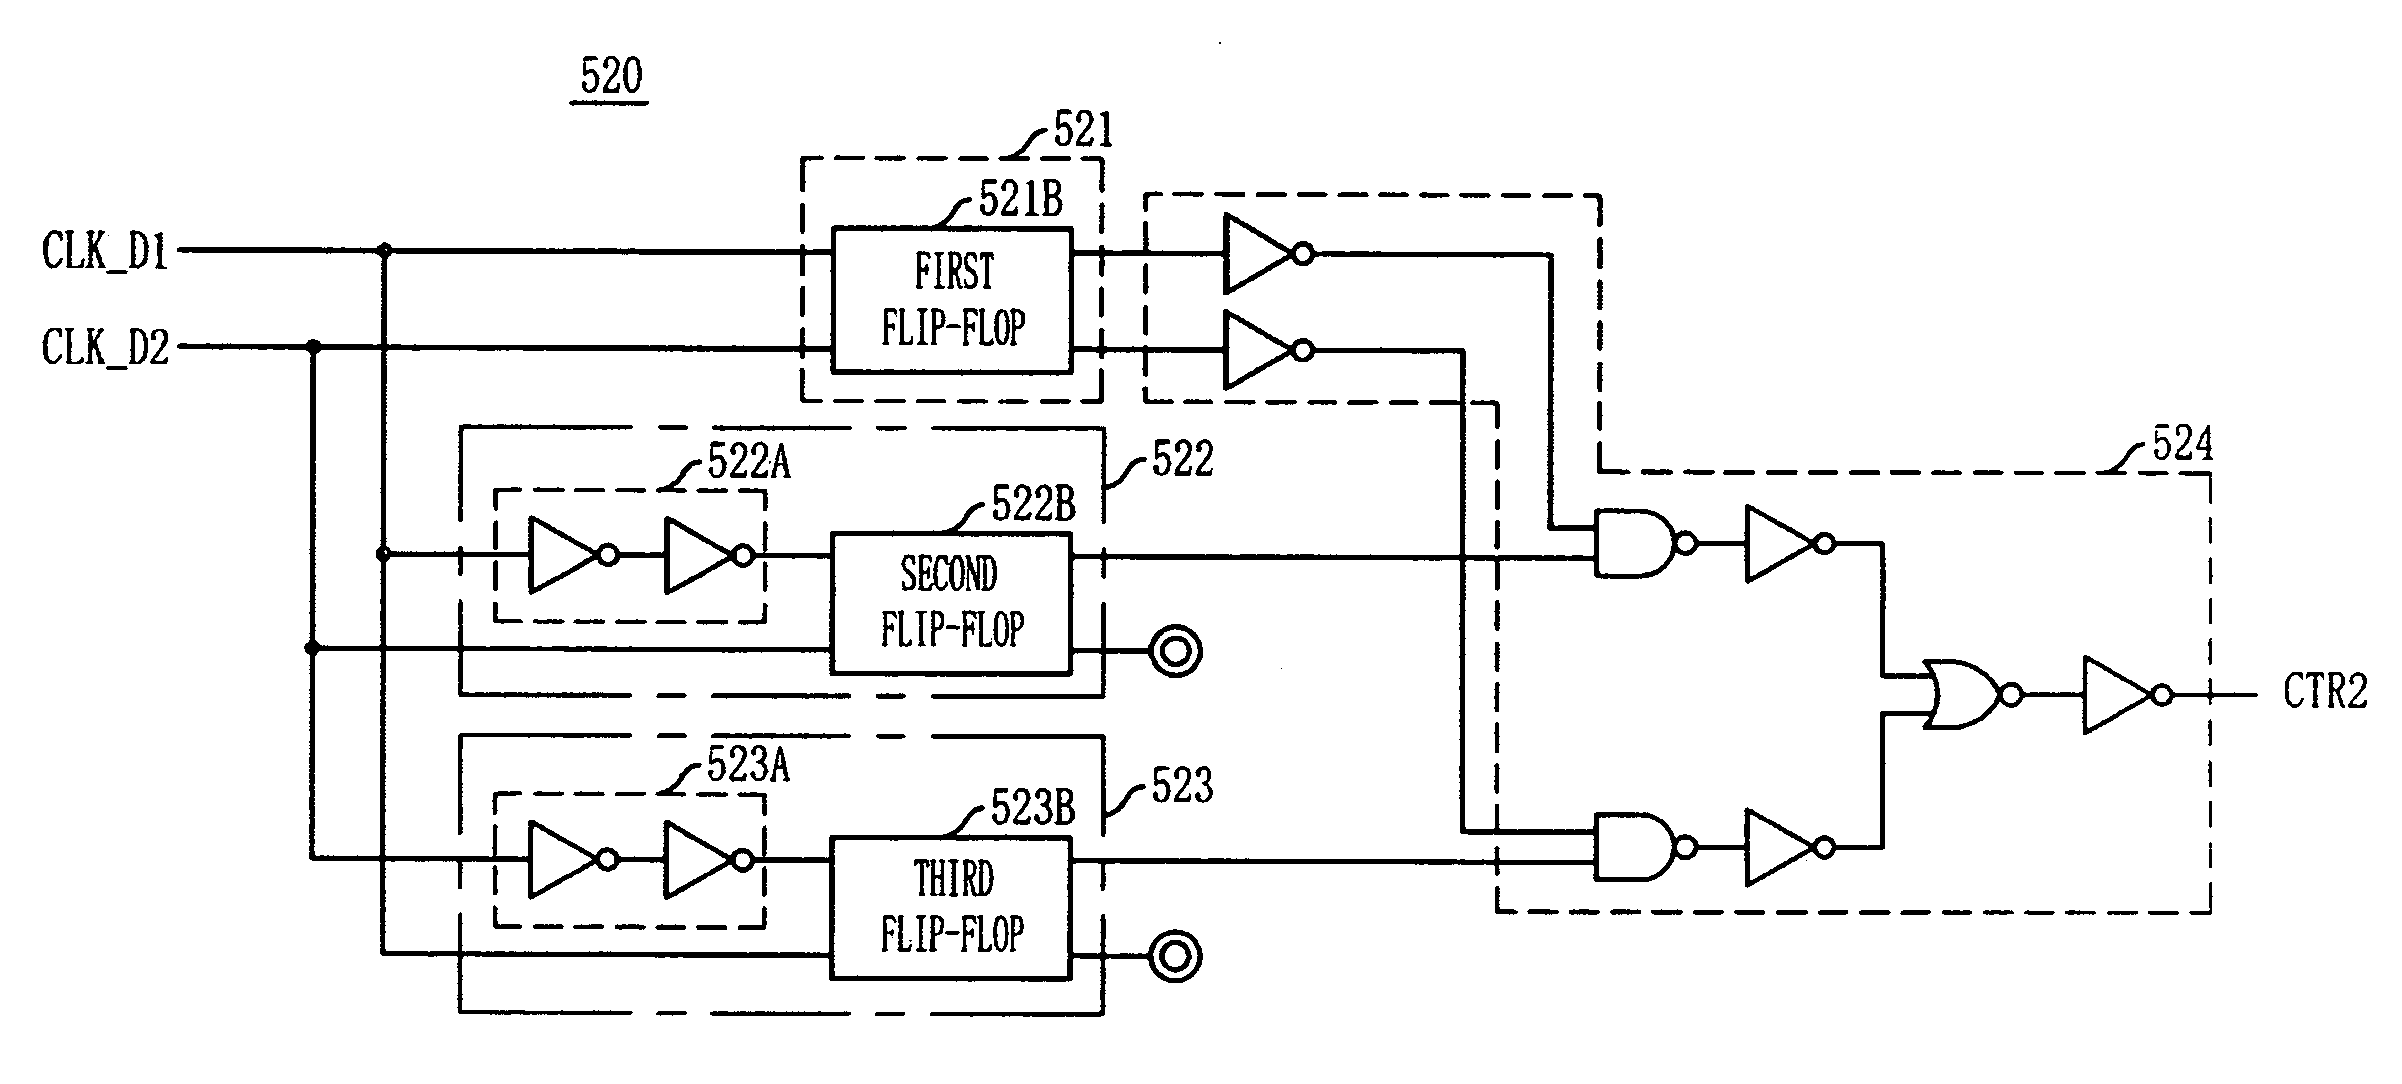 Delay locked loop of semiconductor device and method for driving the same